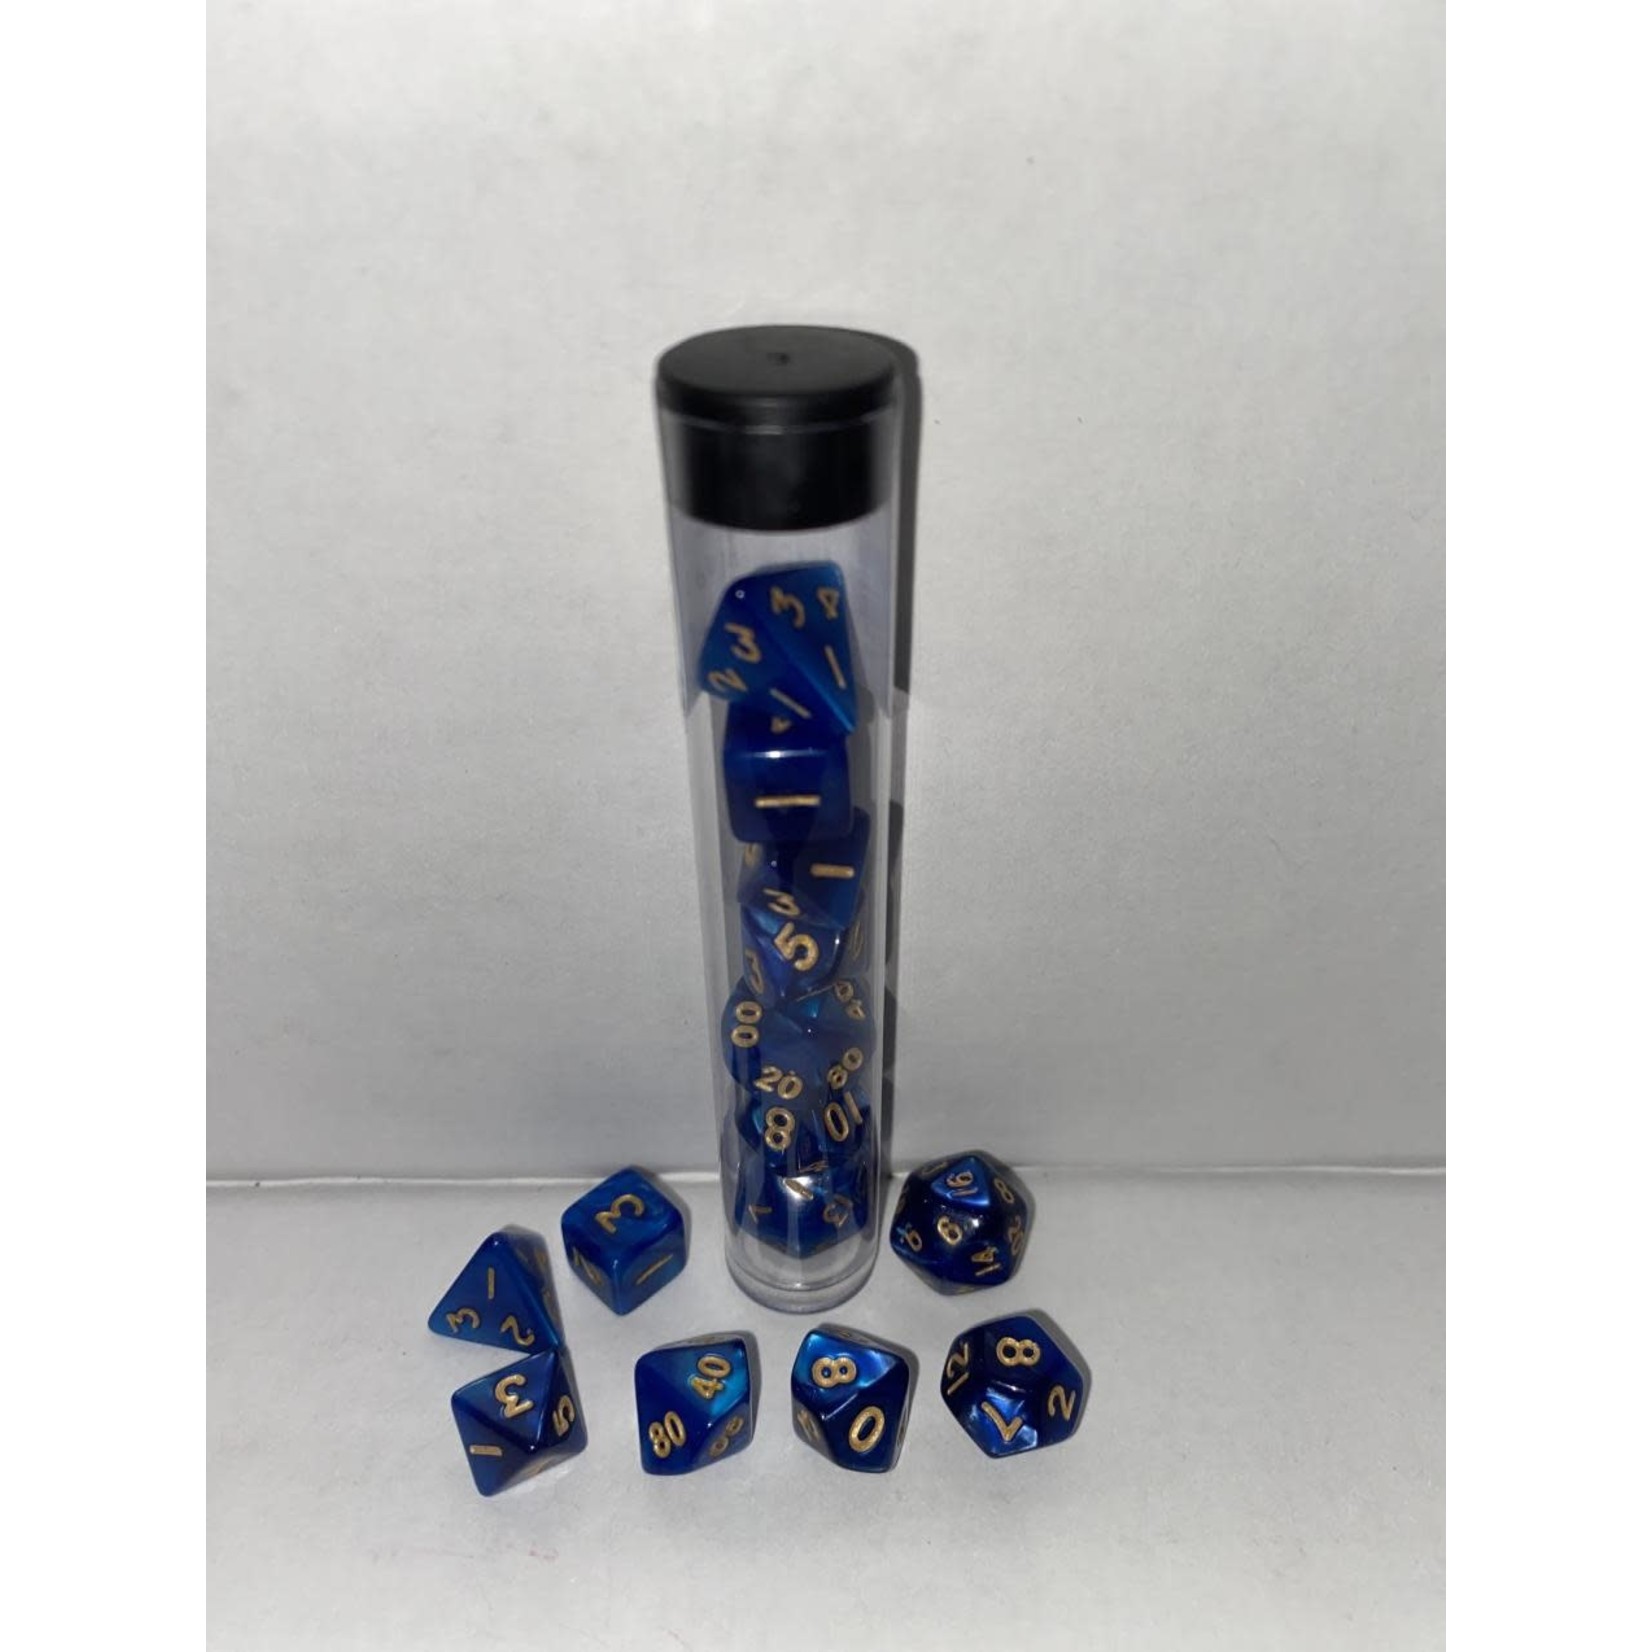 CLC Mini Polyhedral Dice - Marbled Blue/Dark Blue and Gold